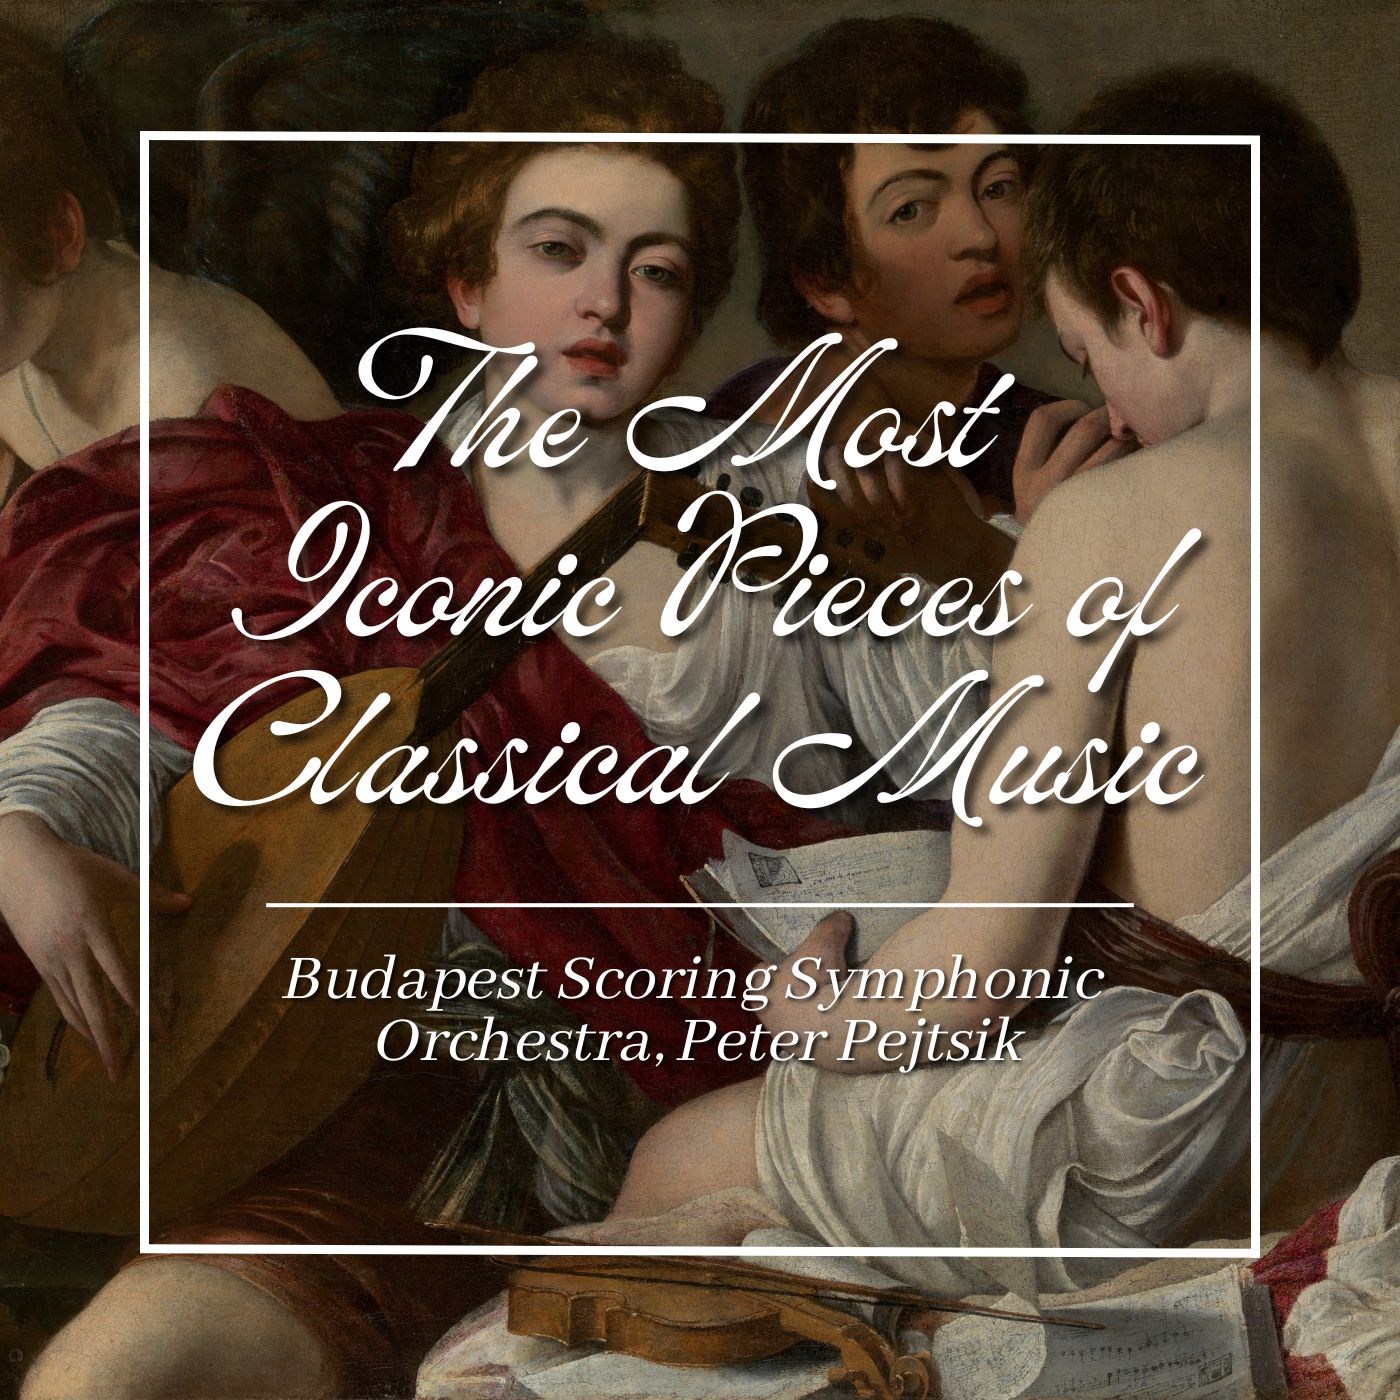 The Most Iconic Pieces of Classical Pieces